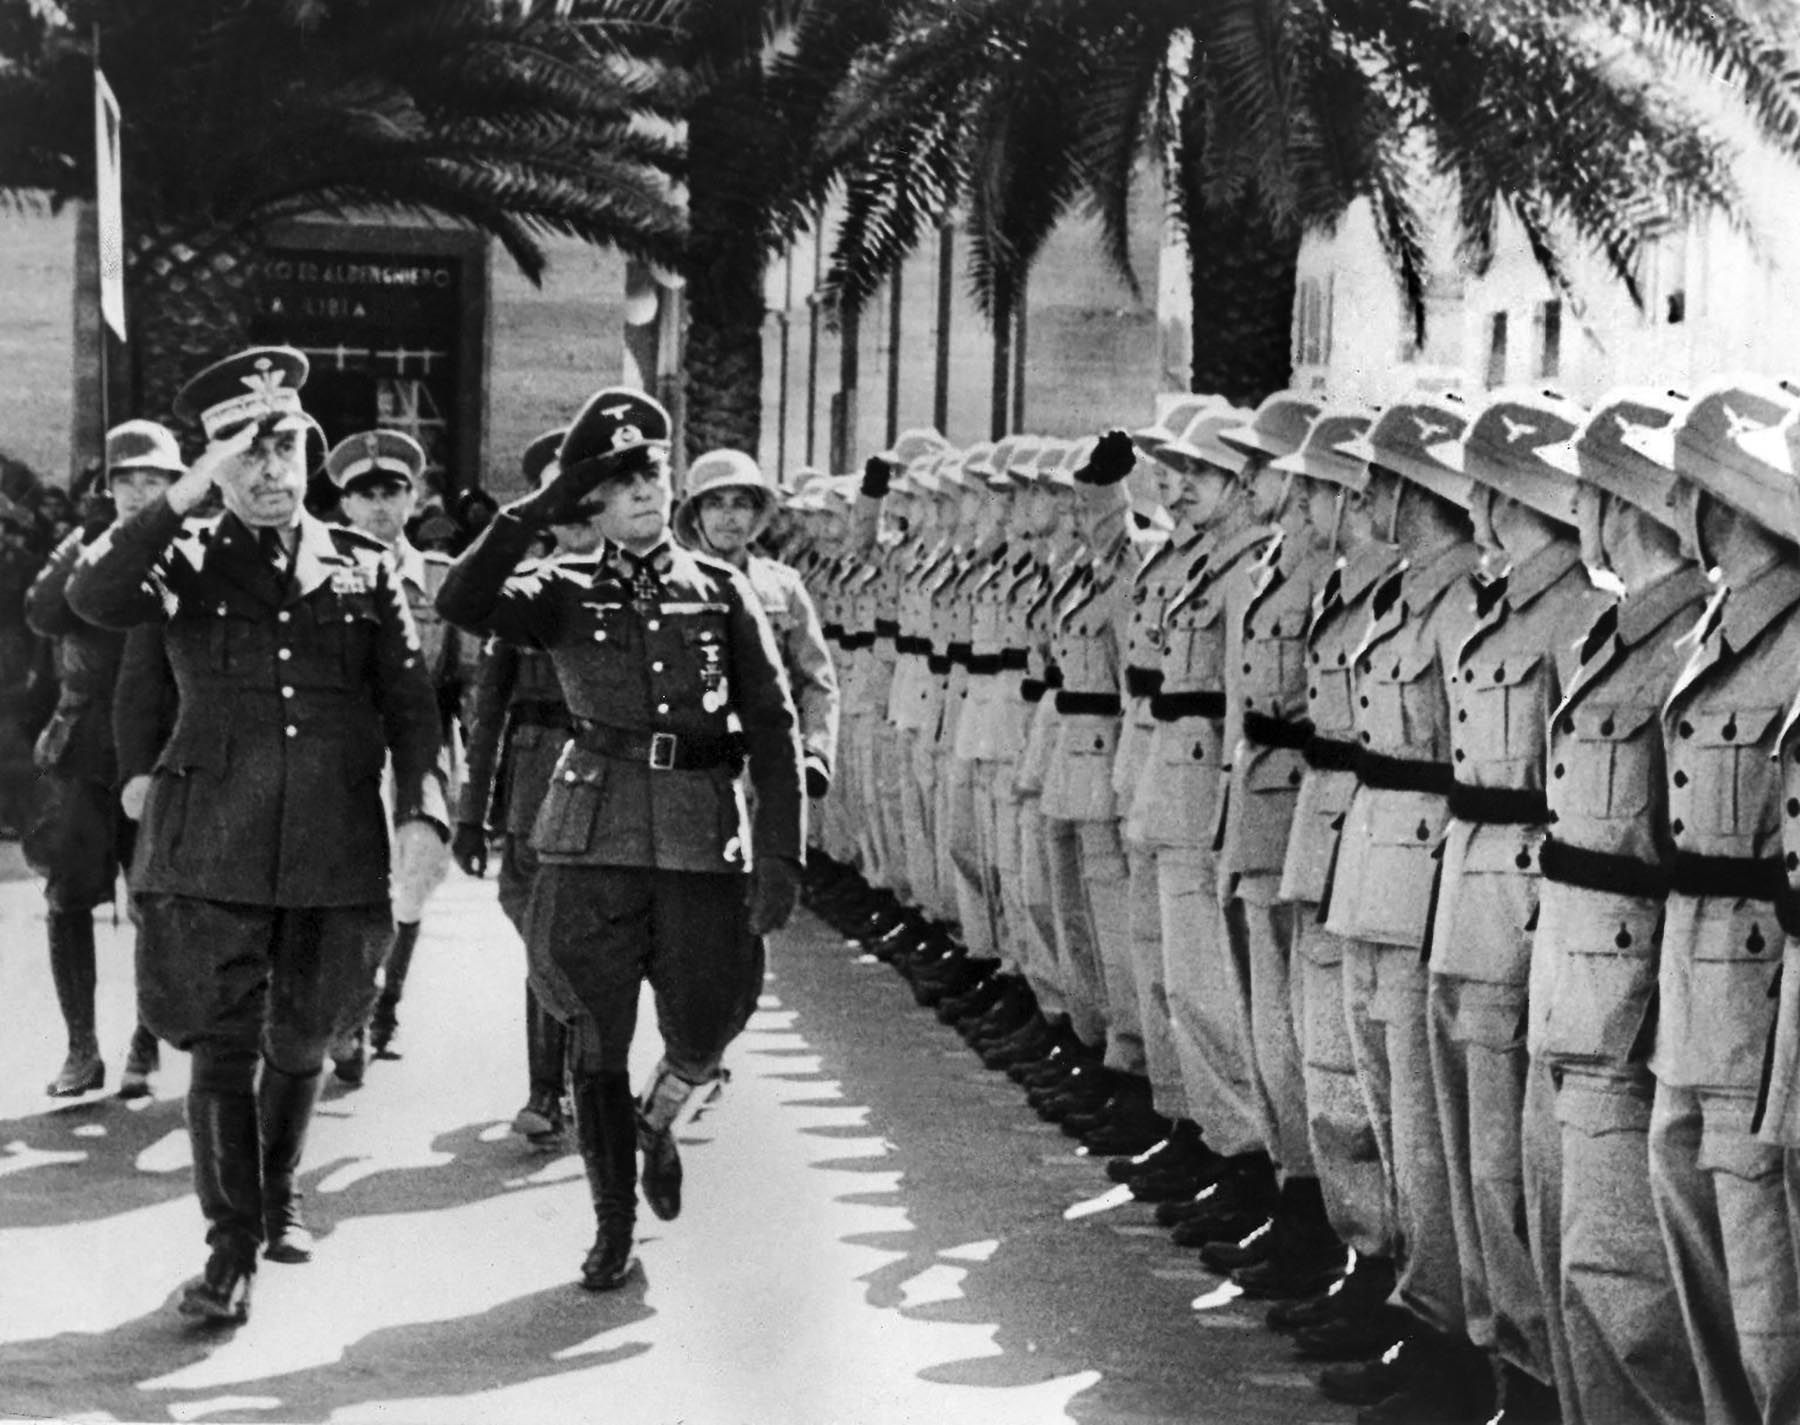 Italian General Italo Gariboldi, left, reviews German Afrika Korps troops with General Rommel in Tripoli. Adolf Hitler sent Rommel to North Africa to bolster Italian forces that had been routed by the British. Gariboldi was the commander of all Axis forces in North Africa, but Rommel disregarded his orders. 